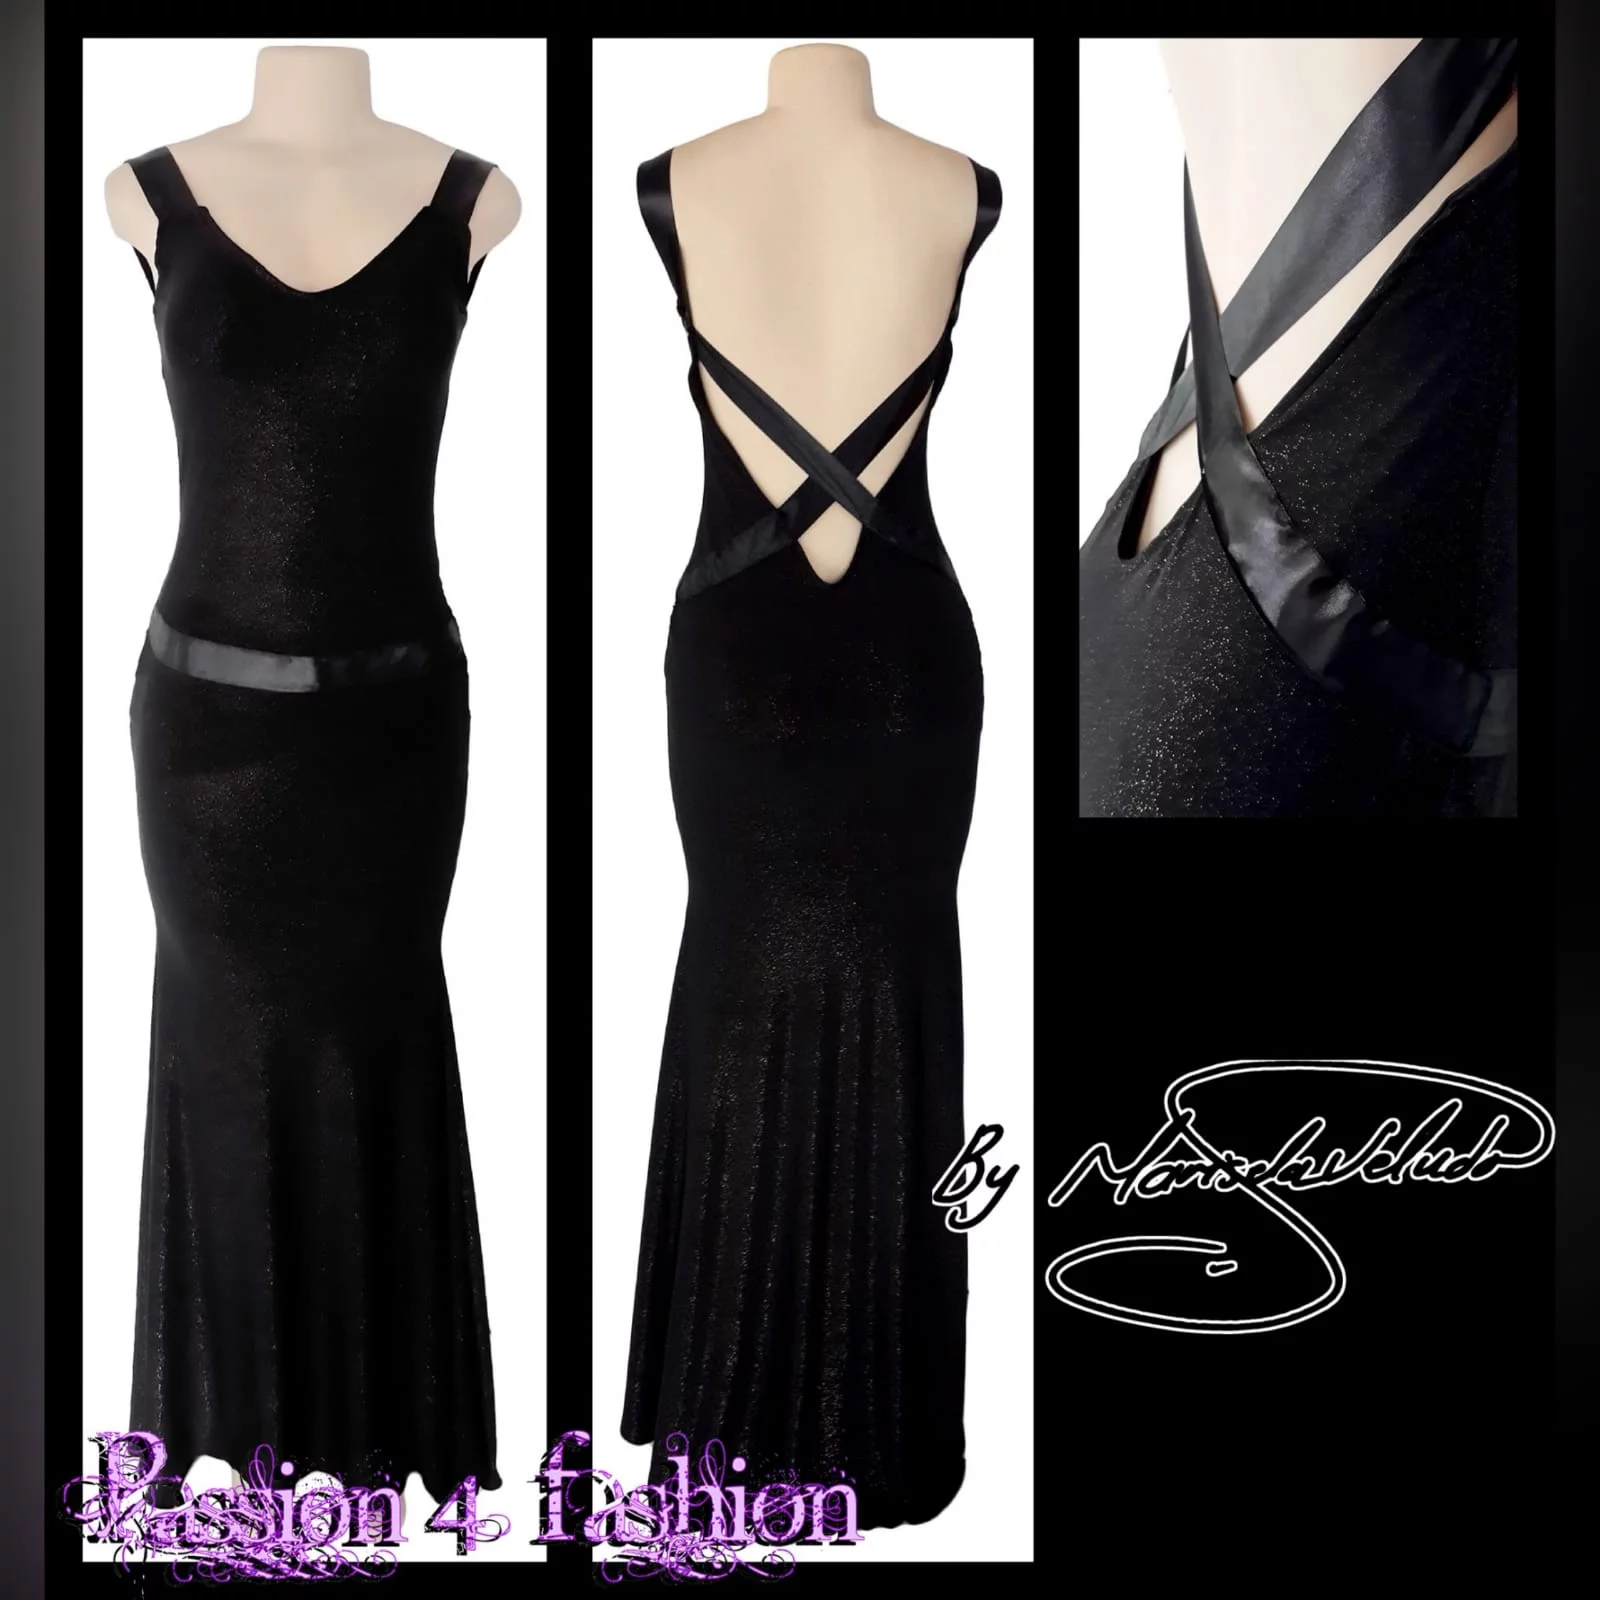 Black shimmer long gala evening dress 2 black shimmer long gala evening dress, with a low v open back. With ribbon creating a belt and a cross at the back